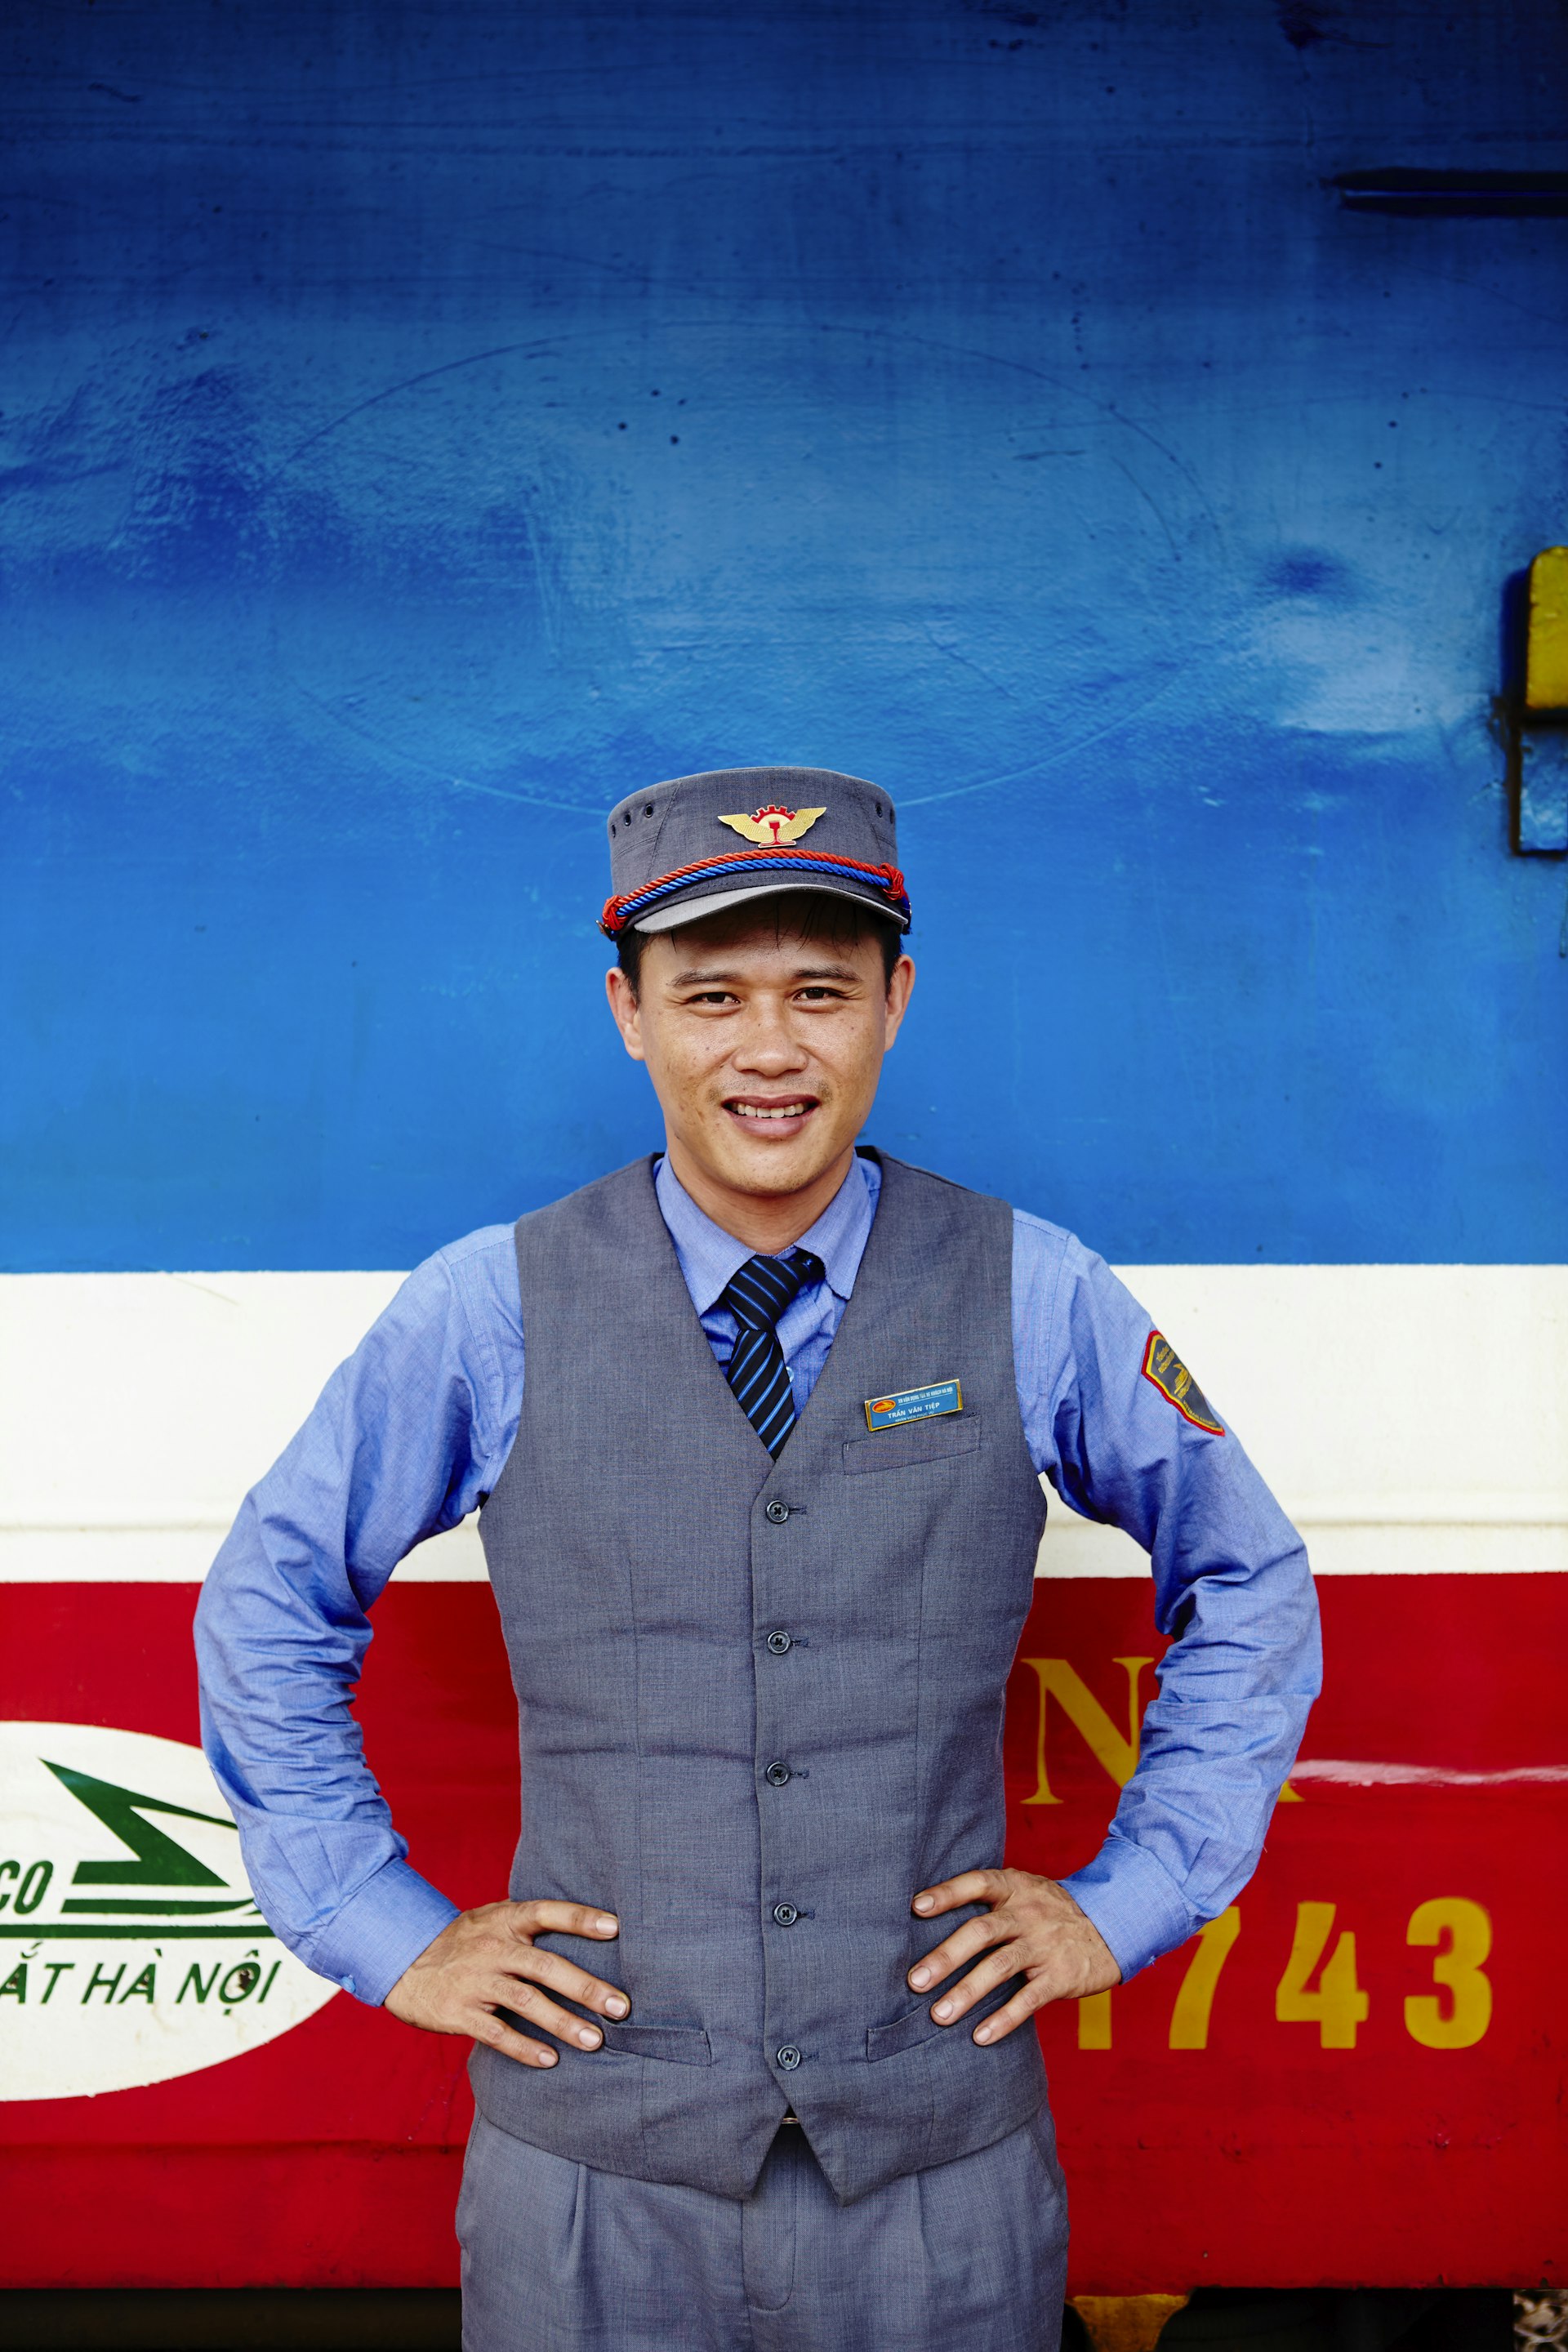 A guard stands in front of a train carriage © Matt Munro / Lonely Planet